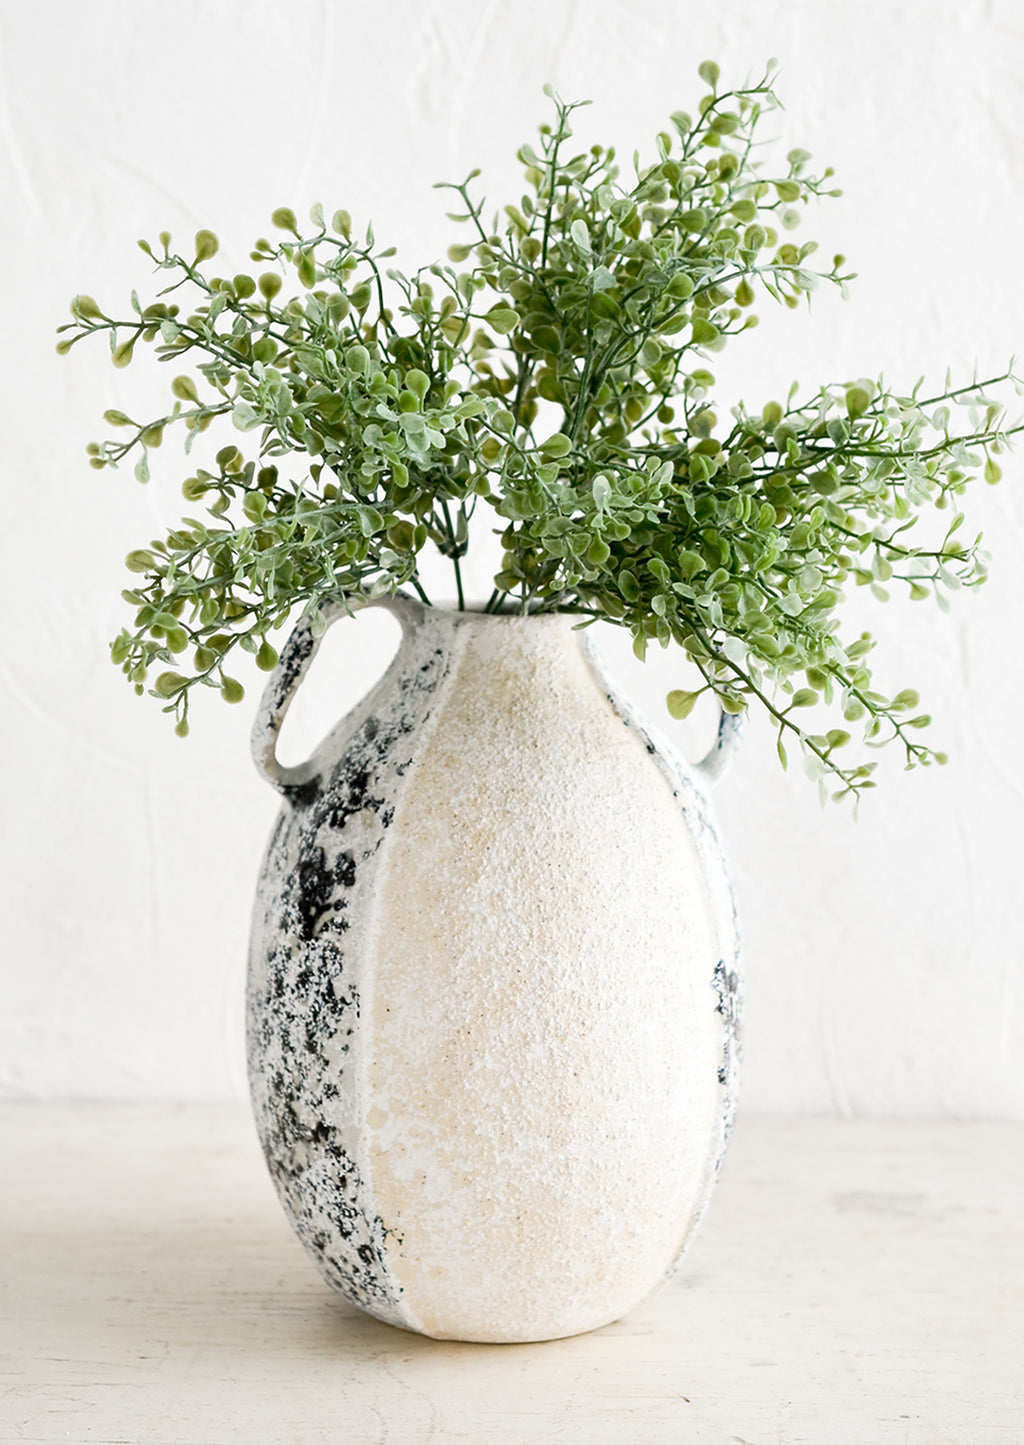 2: A distressed ceramic vase in tall shape with side handles, displaying green leafy plant.